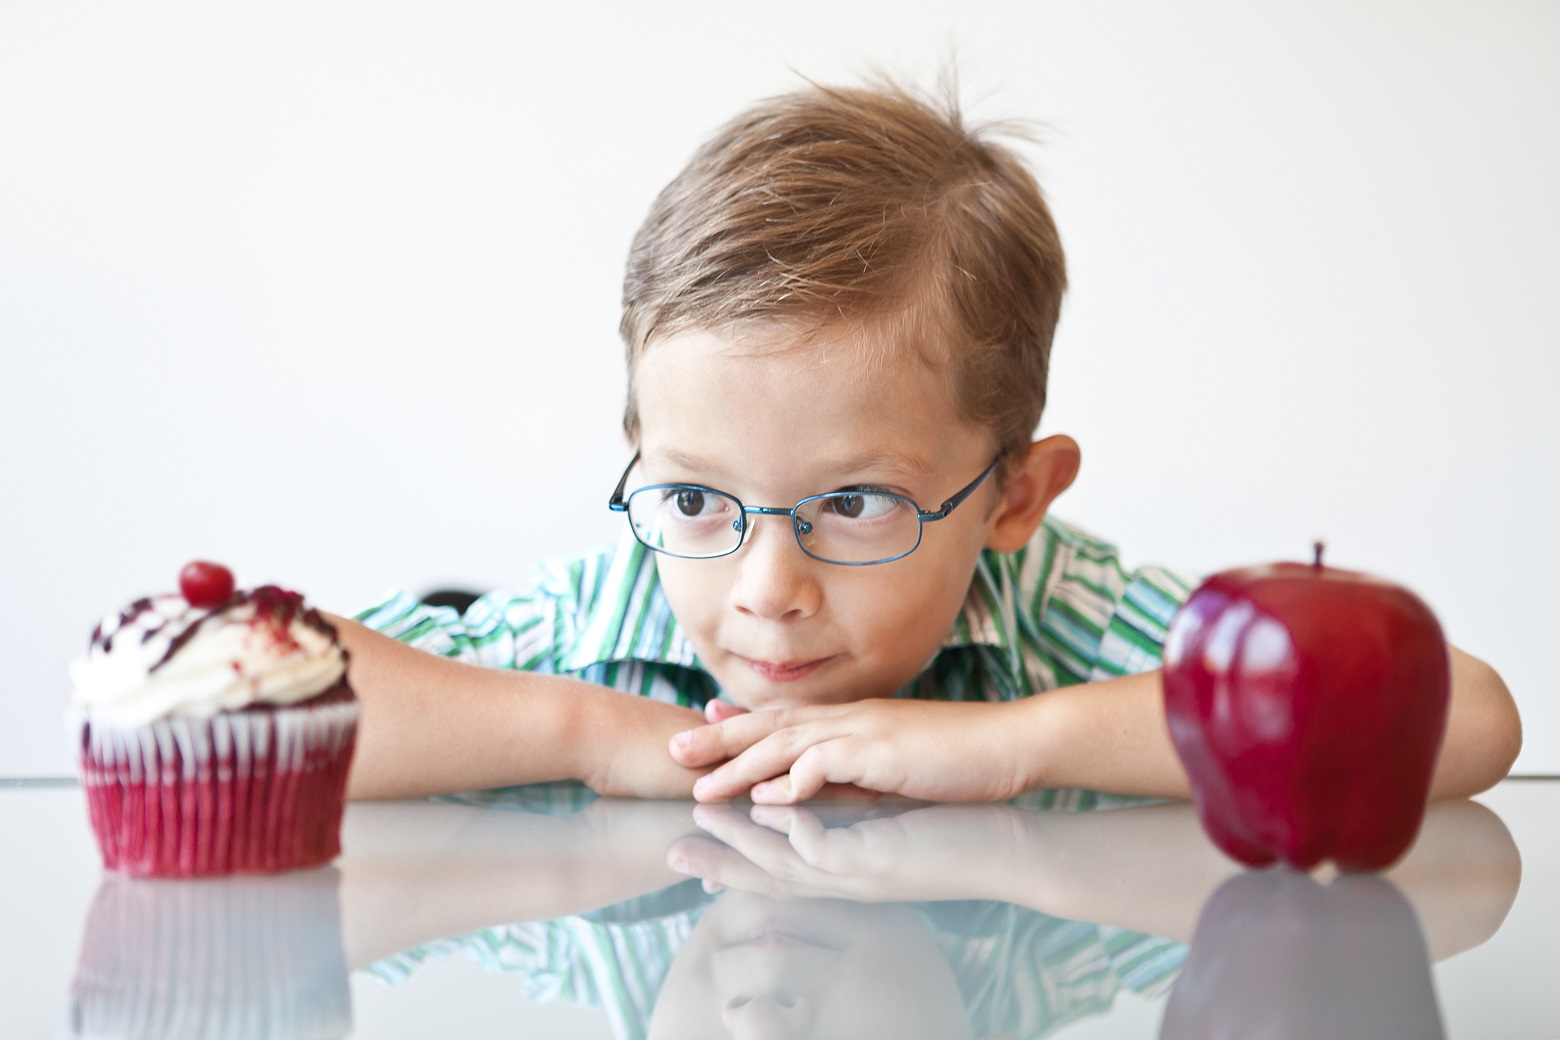 6 Easy Ways to Reduce Your Child’s Sugary Snacking